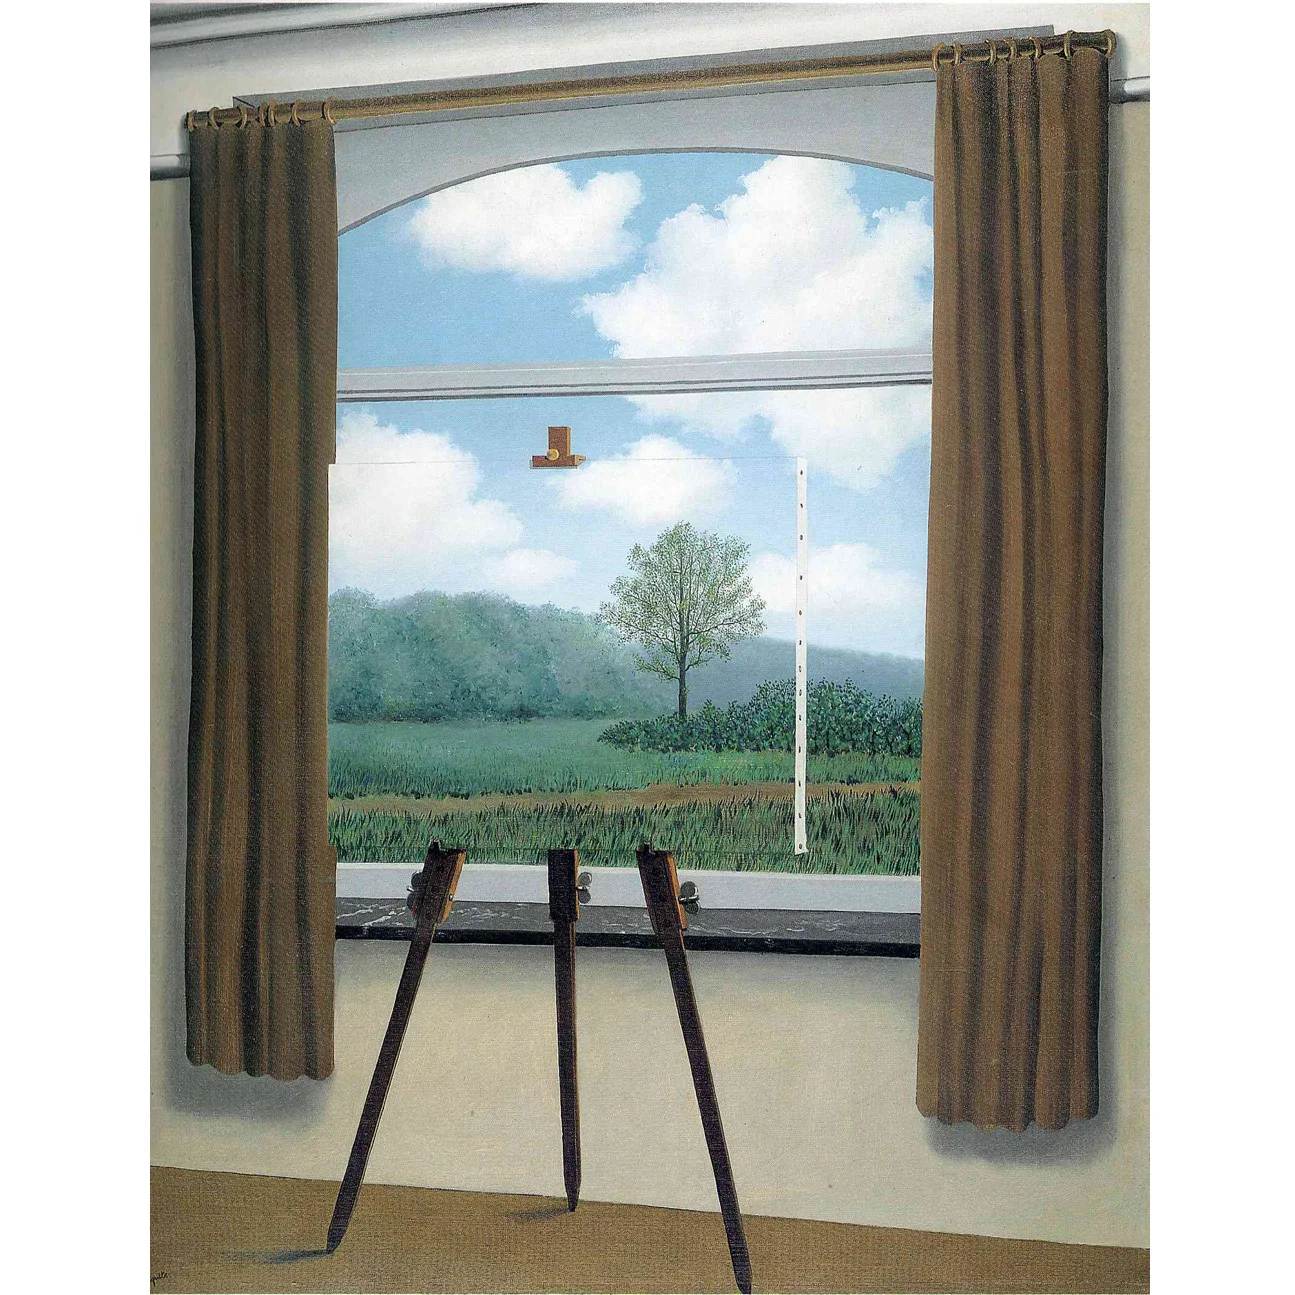 

Hand painted high quality reproduction of The Human Condition by Rene Magritte Landscape oil painting Home decorative picture